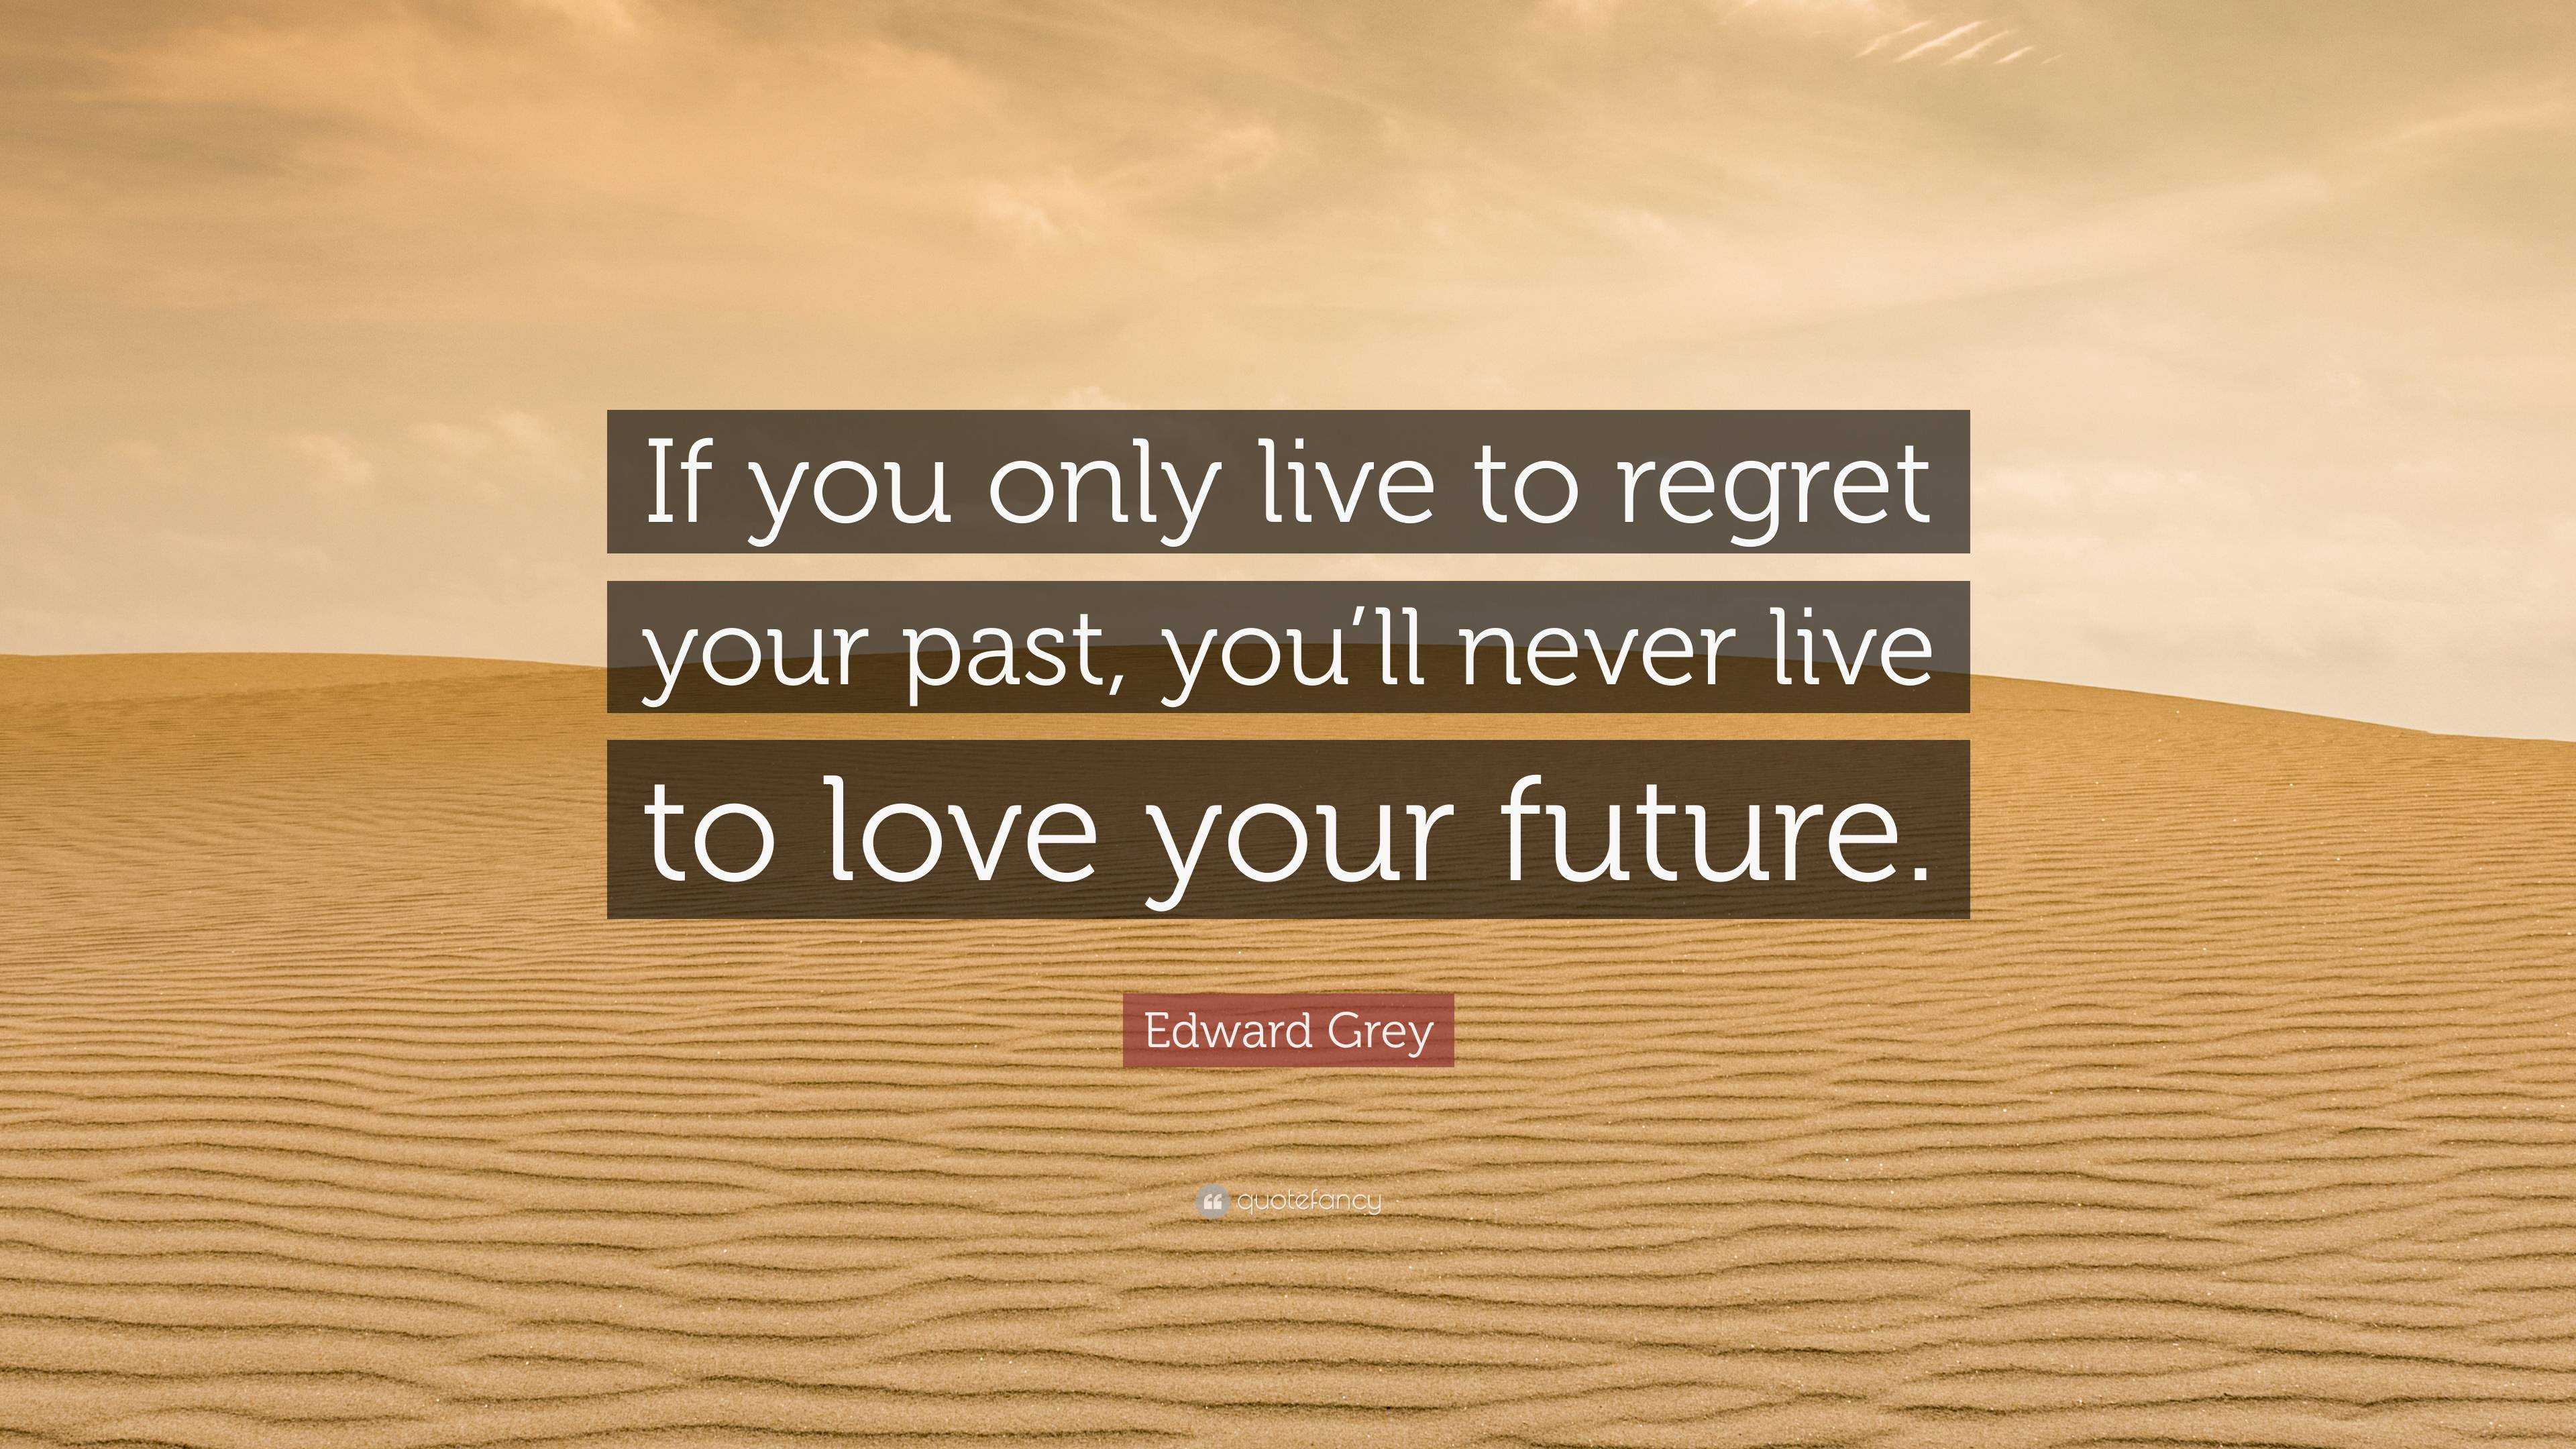 When you live in the past, with its mistakes and regrets, - Quozio